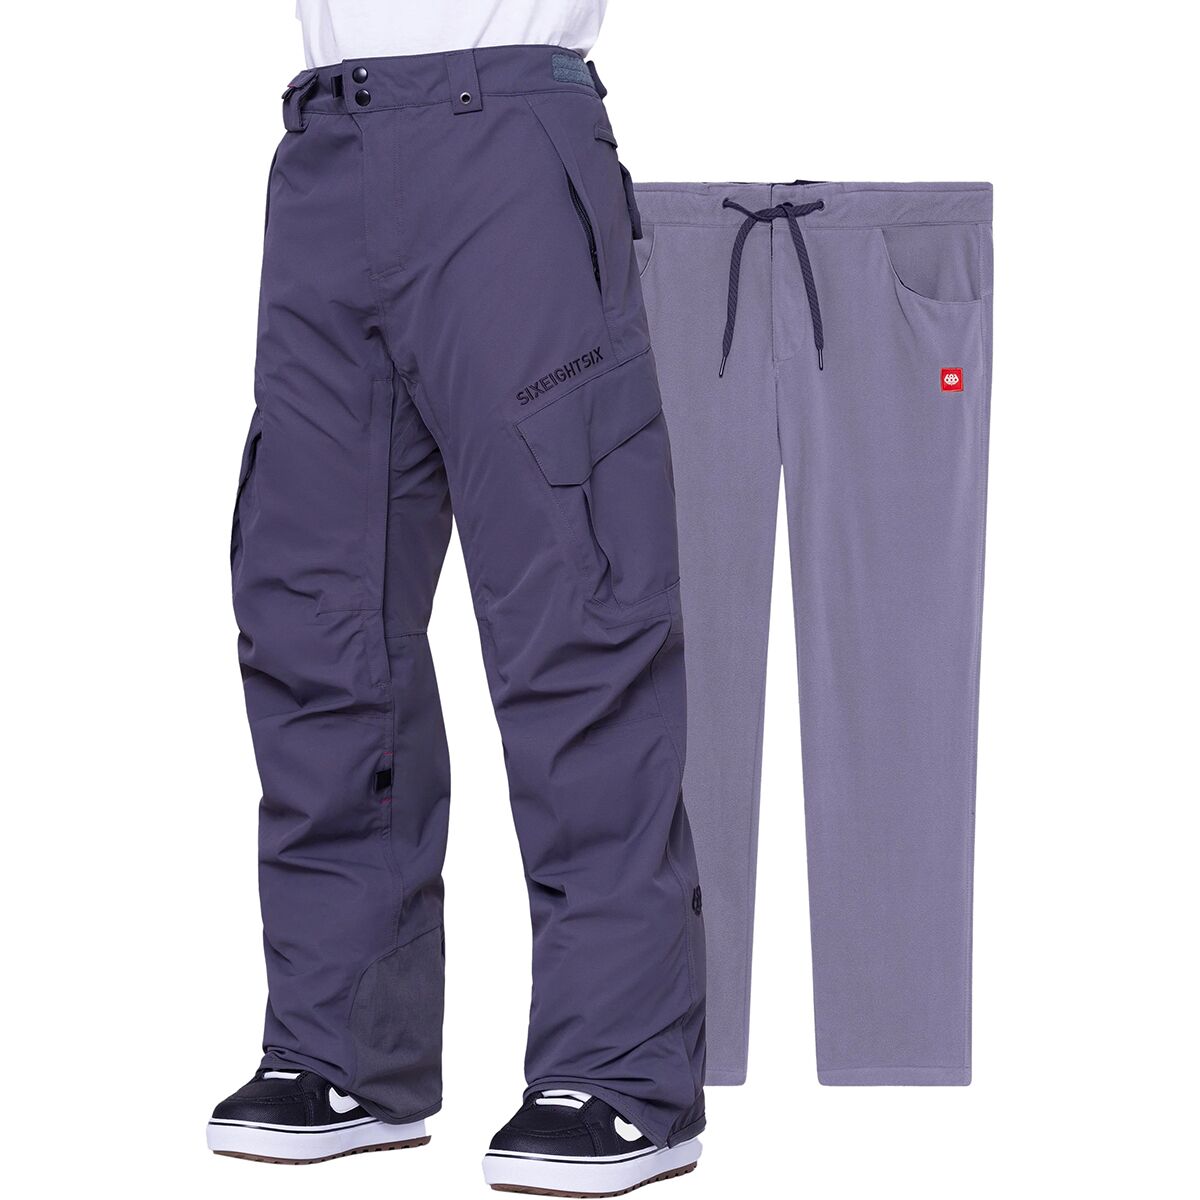 686 Smarty Cargo 3-In-1 Pant - Men's Charcoal